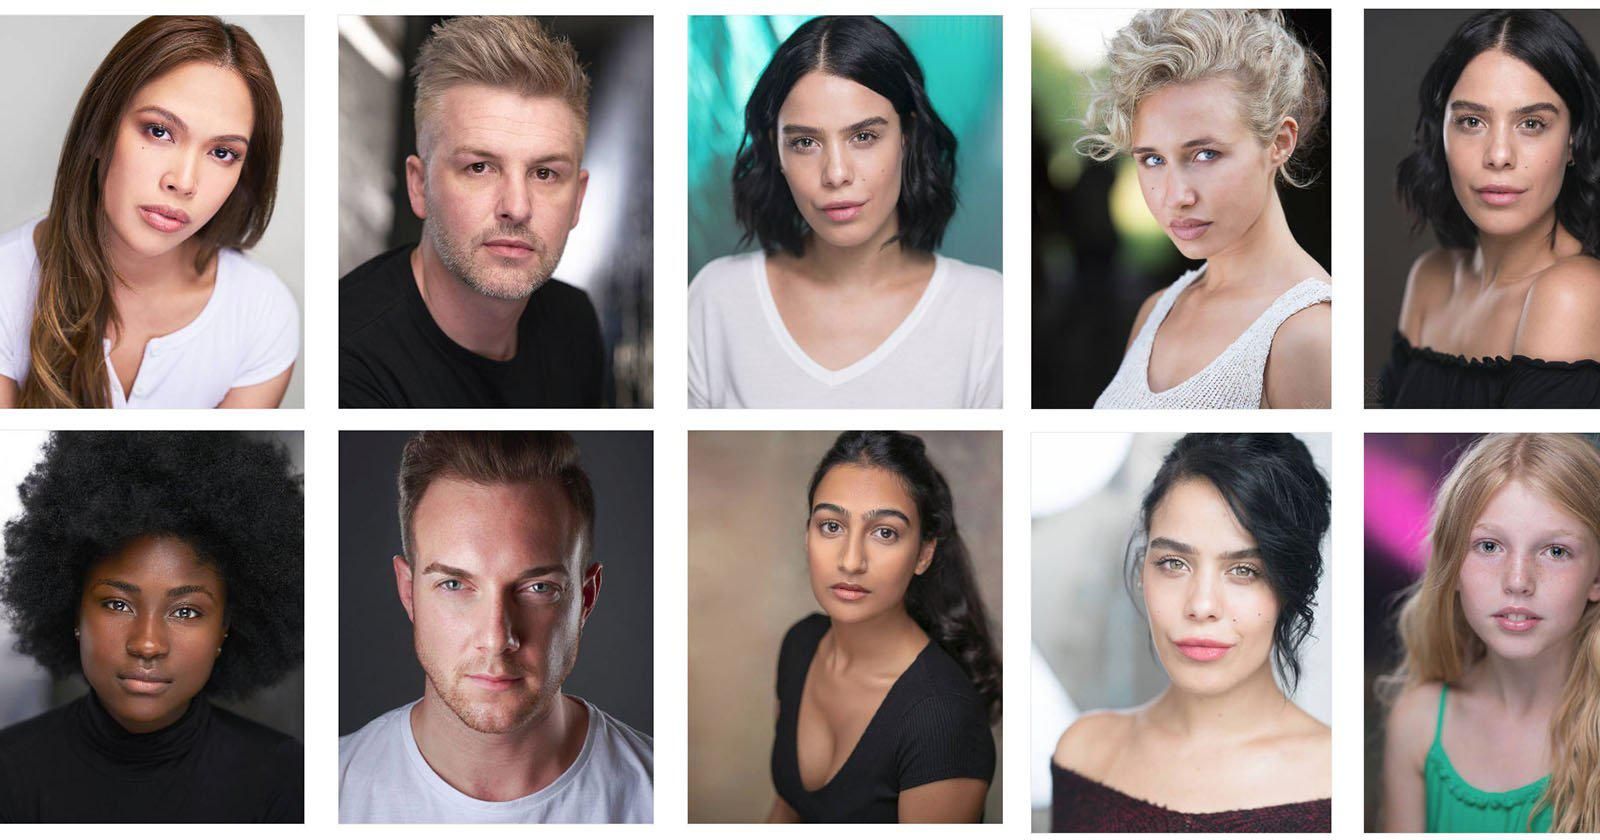 Best Headshot Photographer in London: Finding the Right One for You